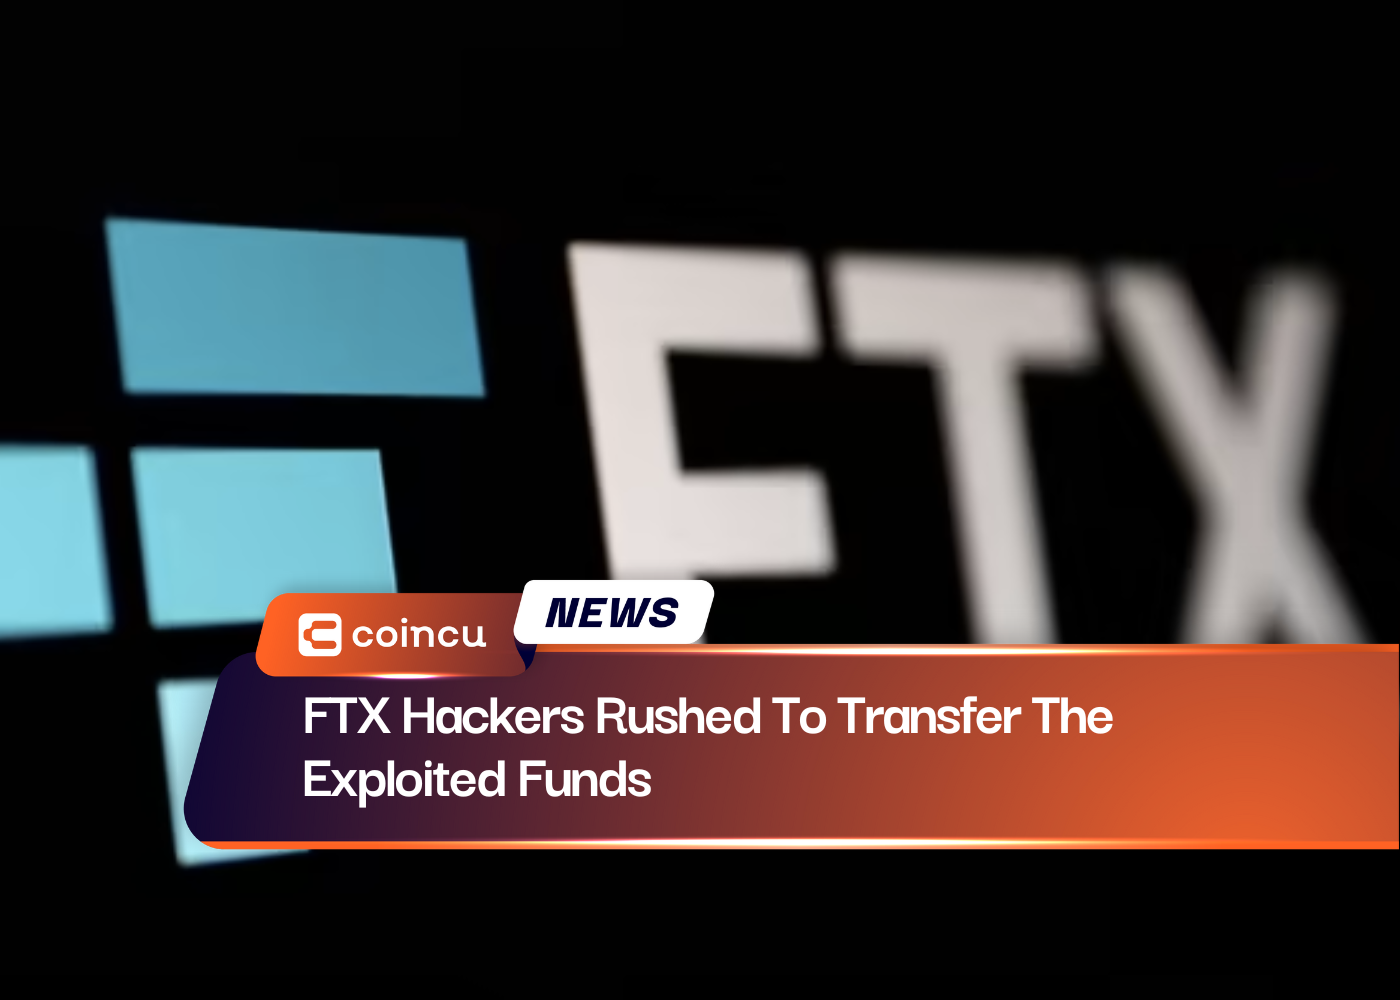 FTX Hackers Rushed To Transfer The Exploited Funds